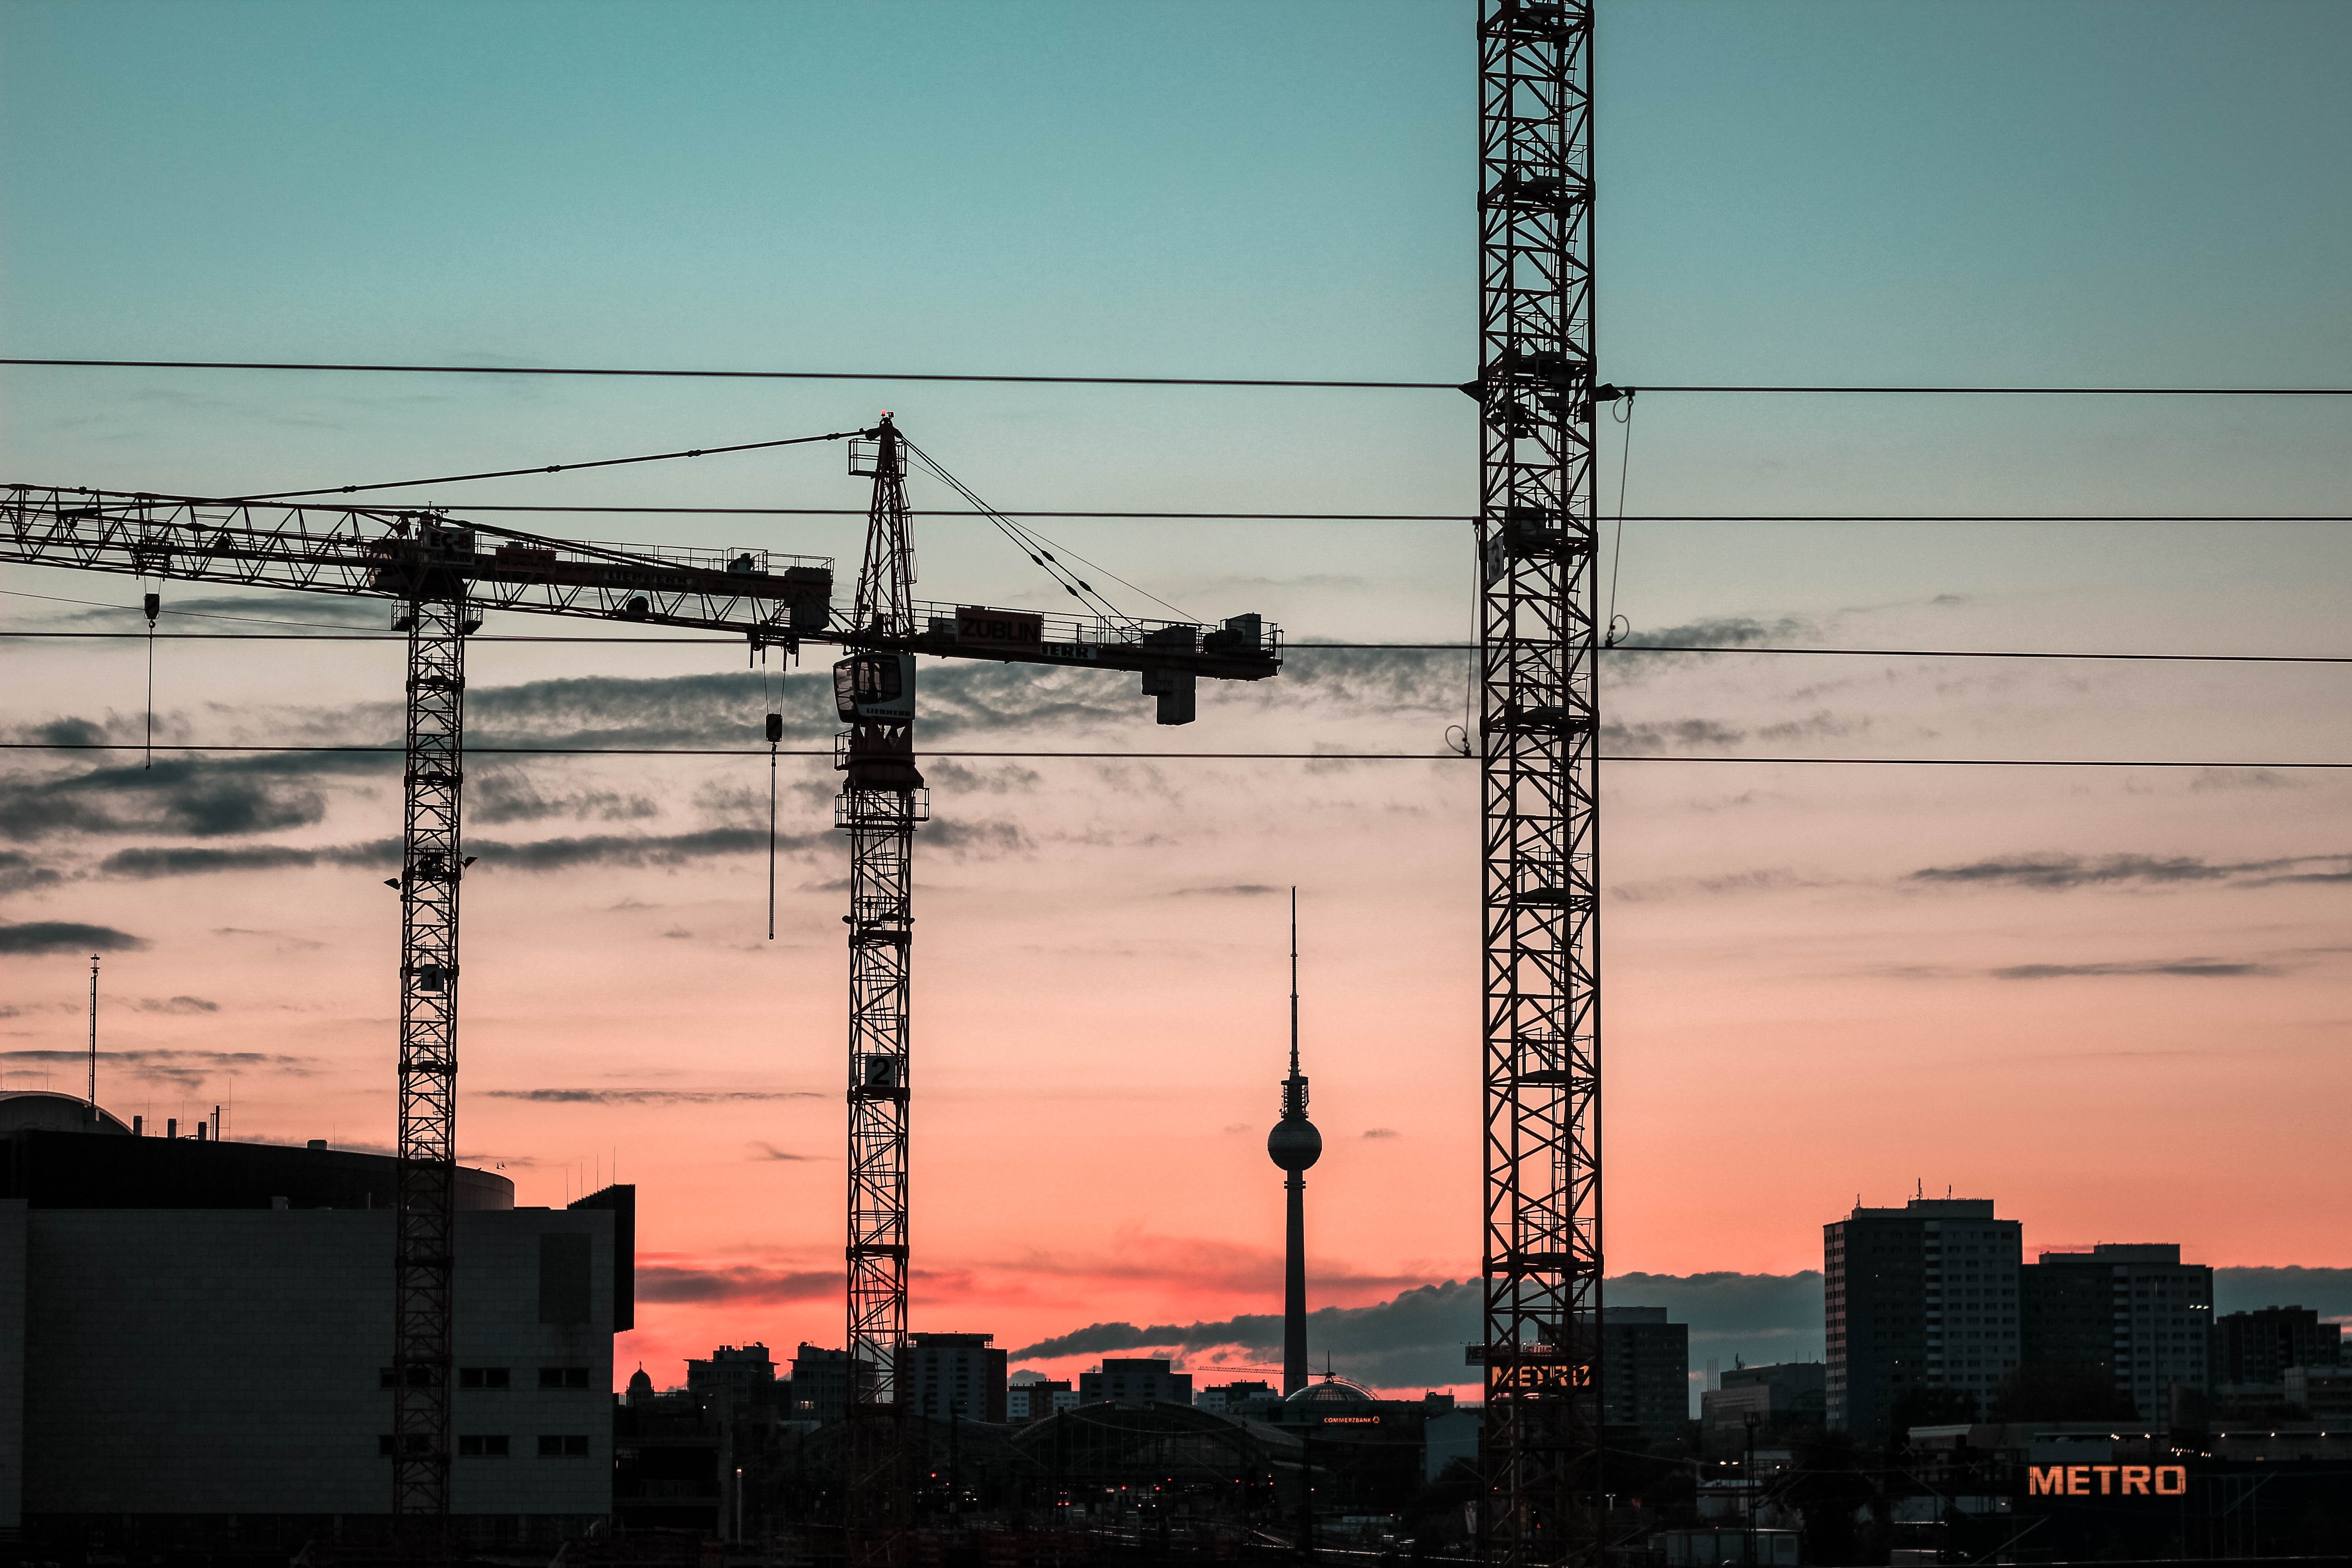 Sunset at construction site 